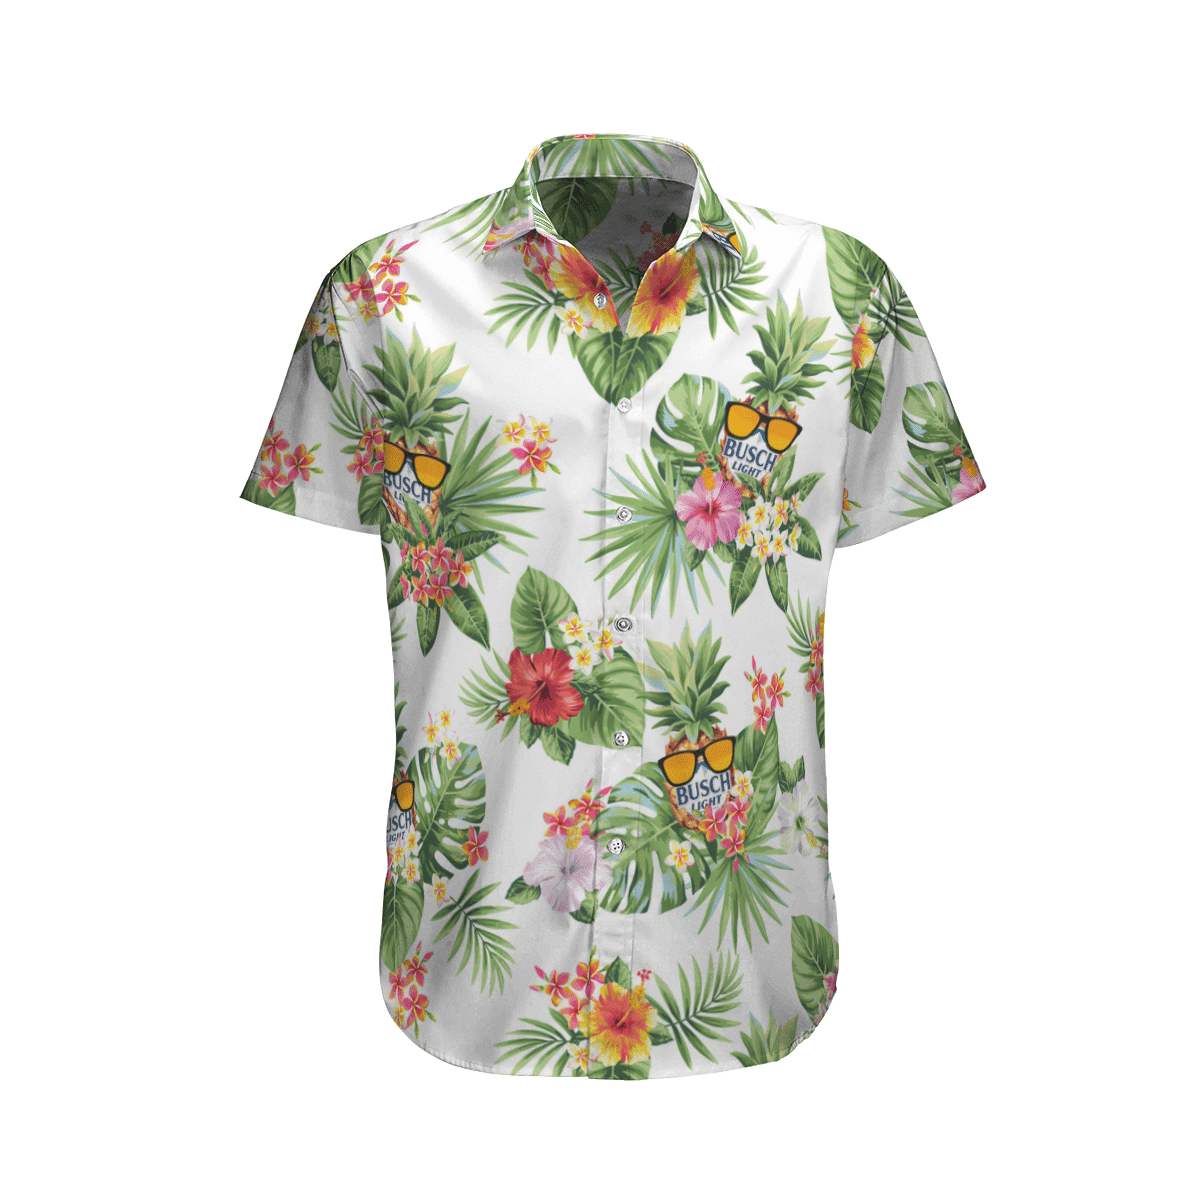 Top cool Hawaiian shirt 2022 - Make sure you get yours today before they run out! 14